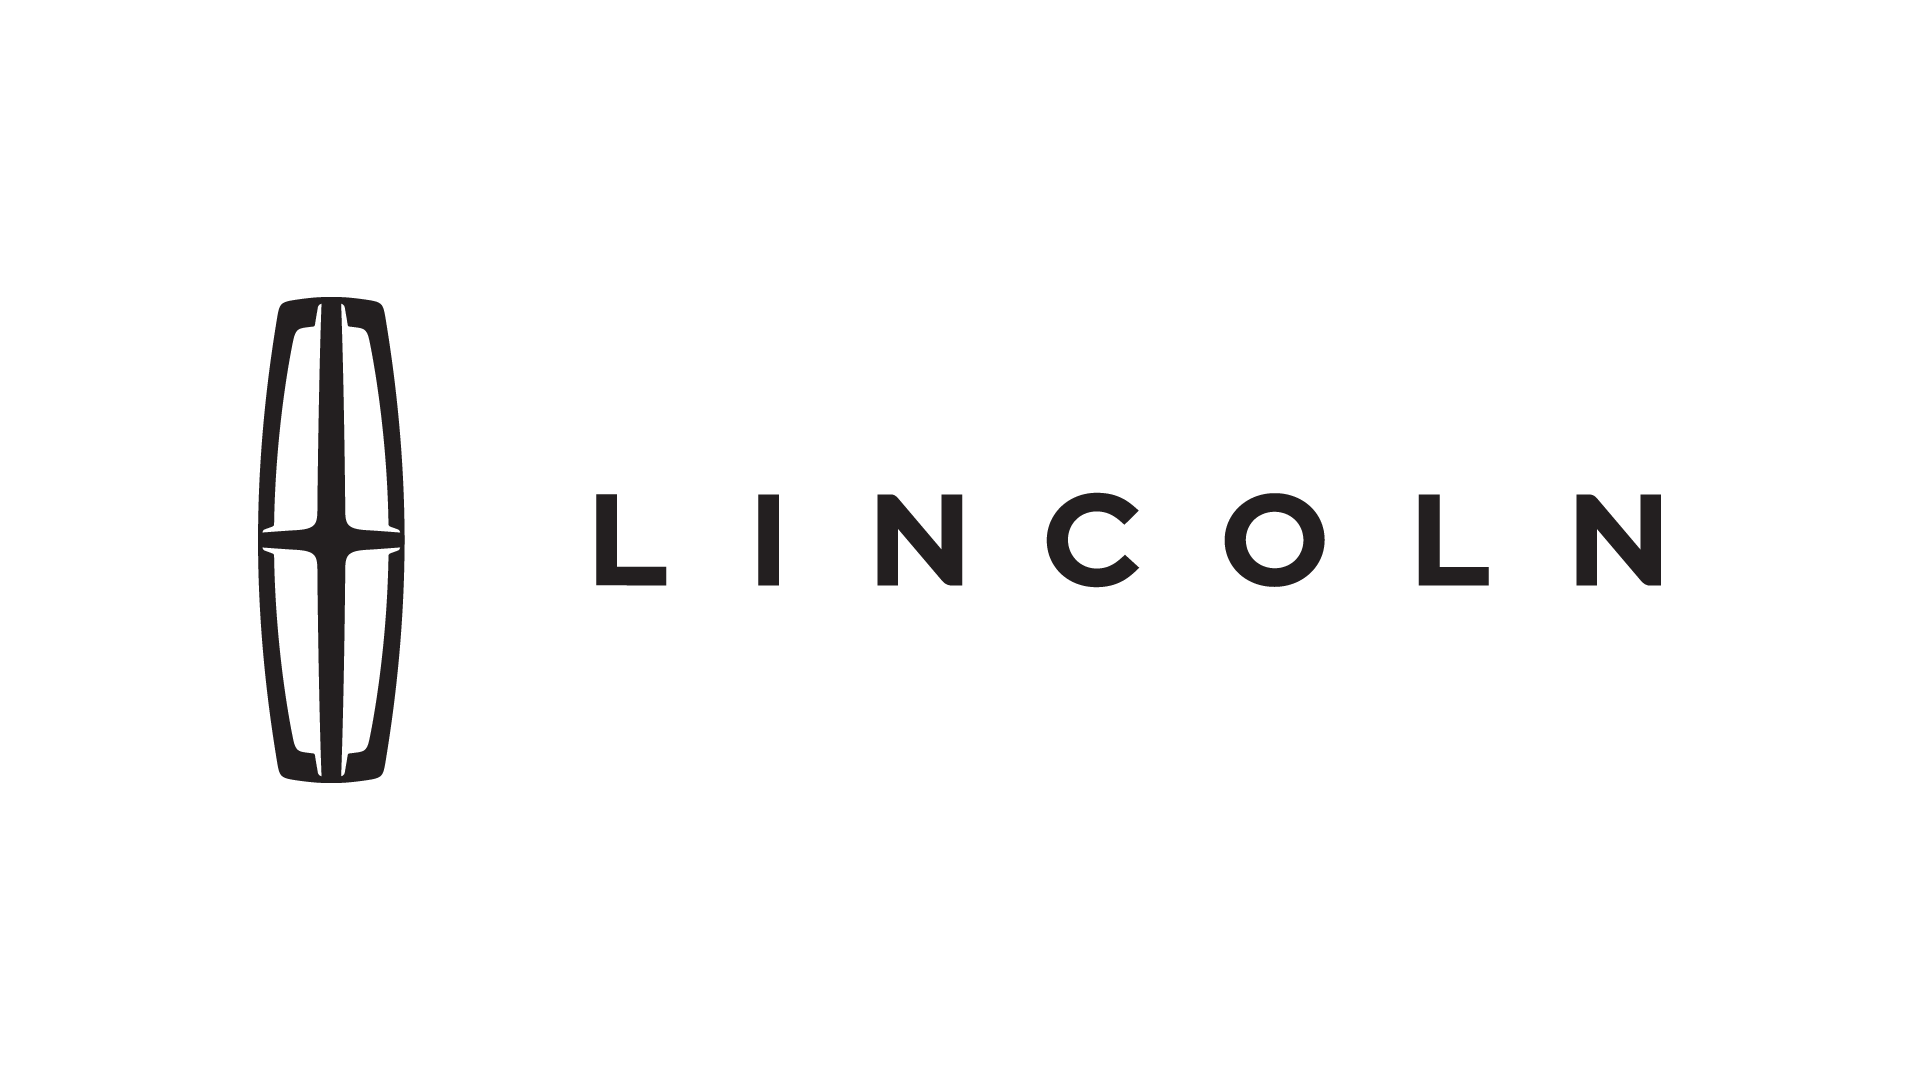 Lincoln-logo-2019-1920x1080.png